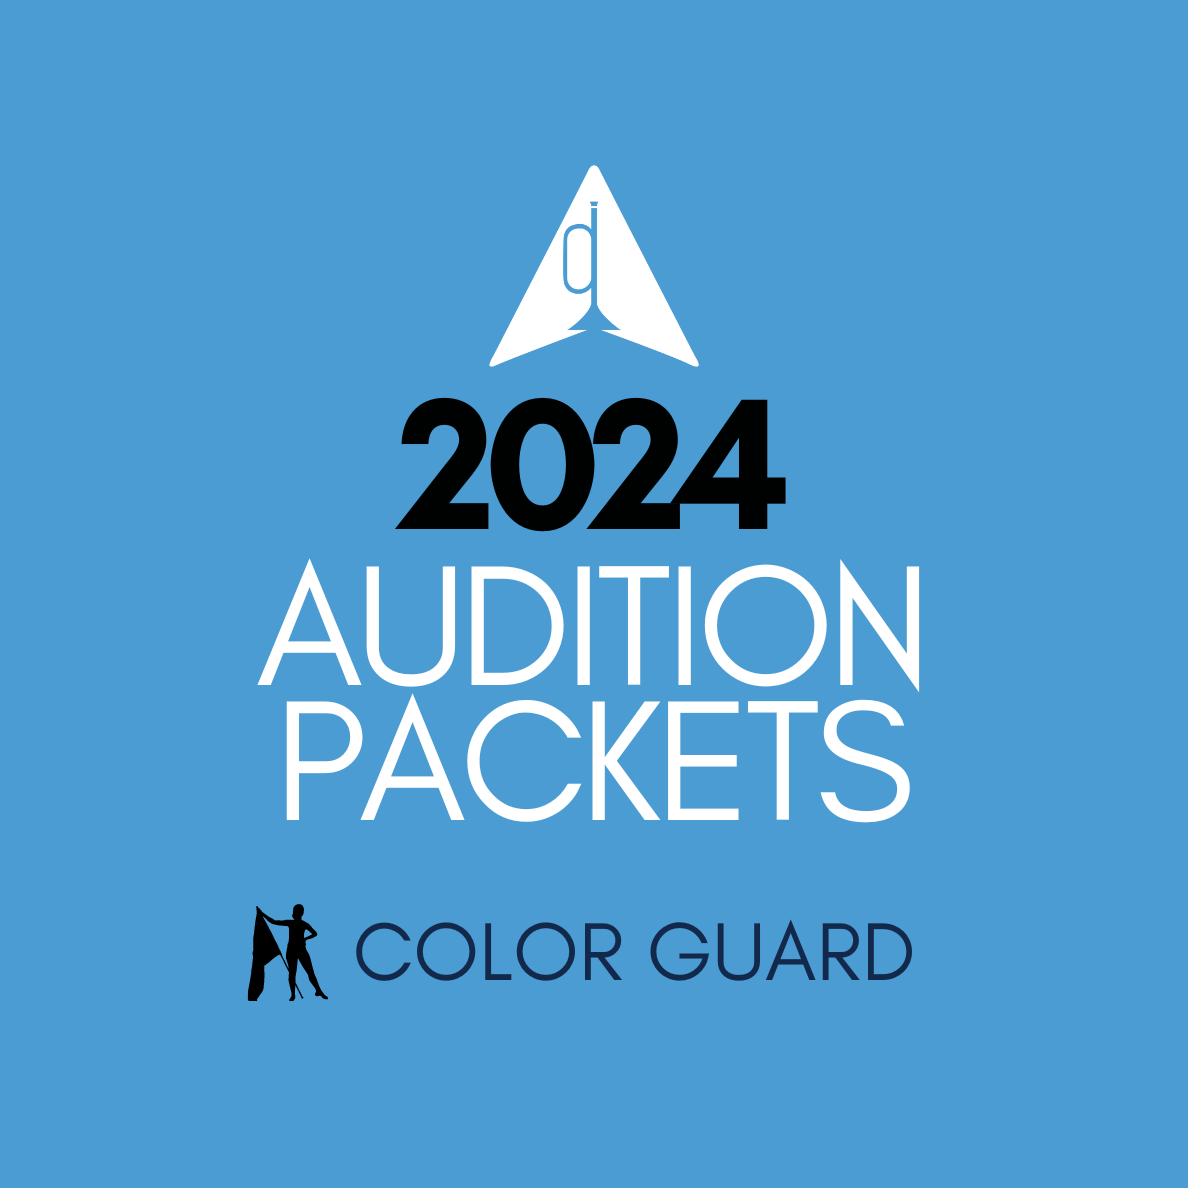 2024 Audition Packet: Color Guard